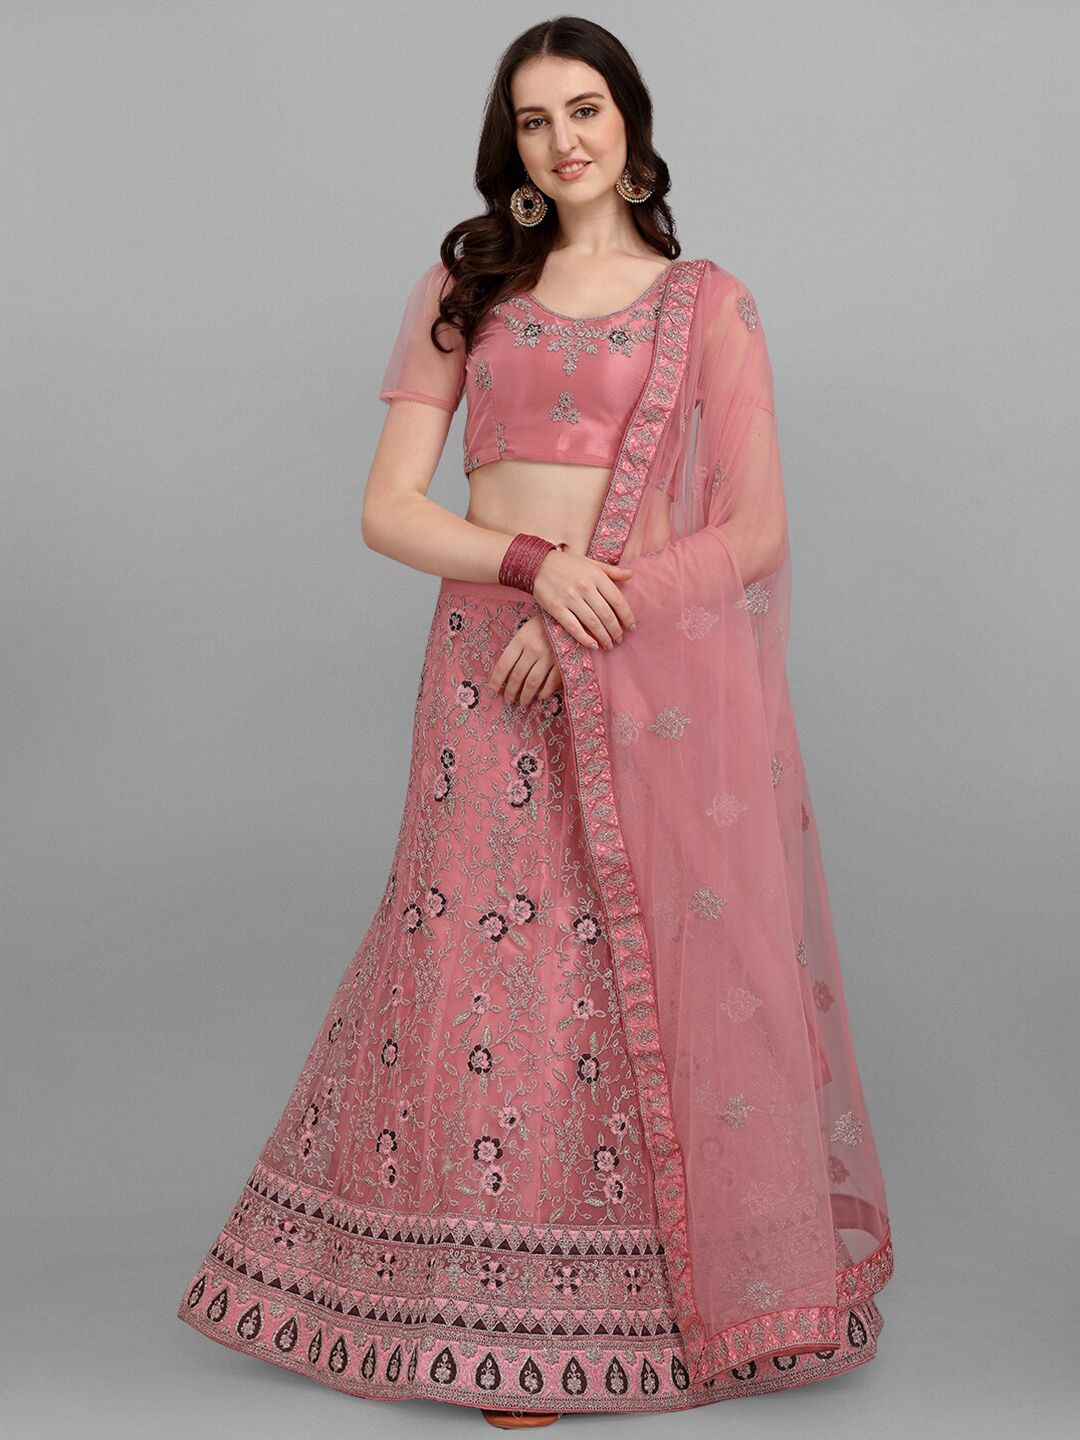 V SALES Pink & Silver-Toned Embroidered Zari Work Semi-Stitched Lehenga Set Price in India